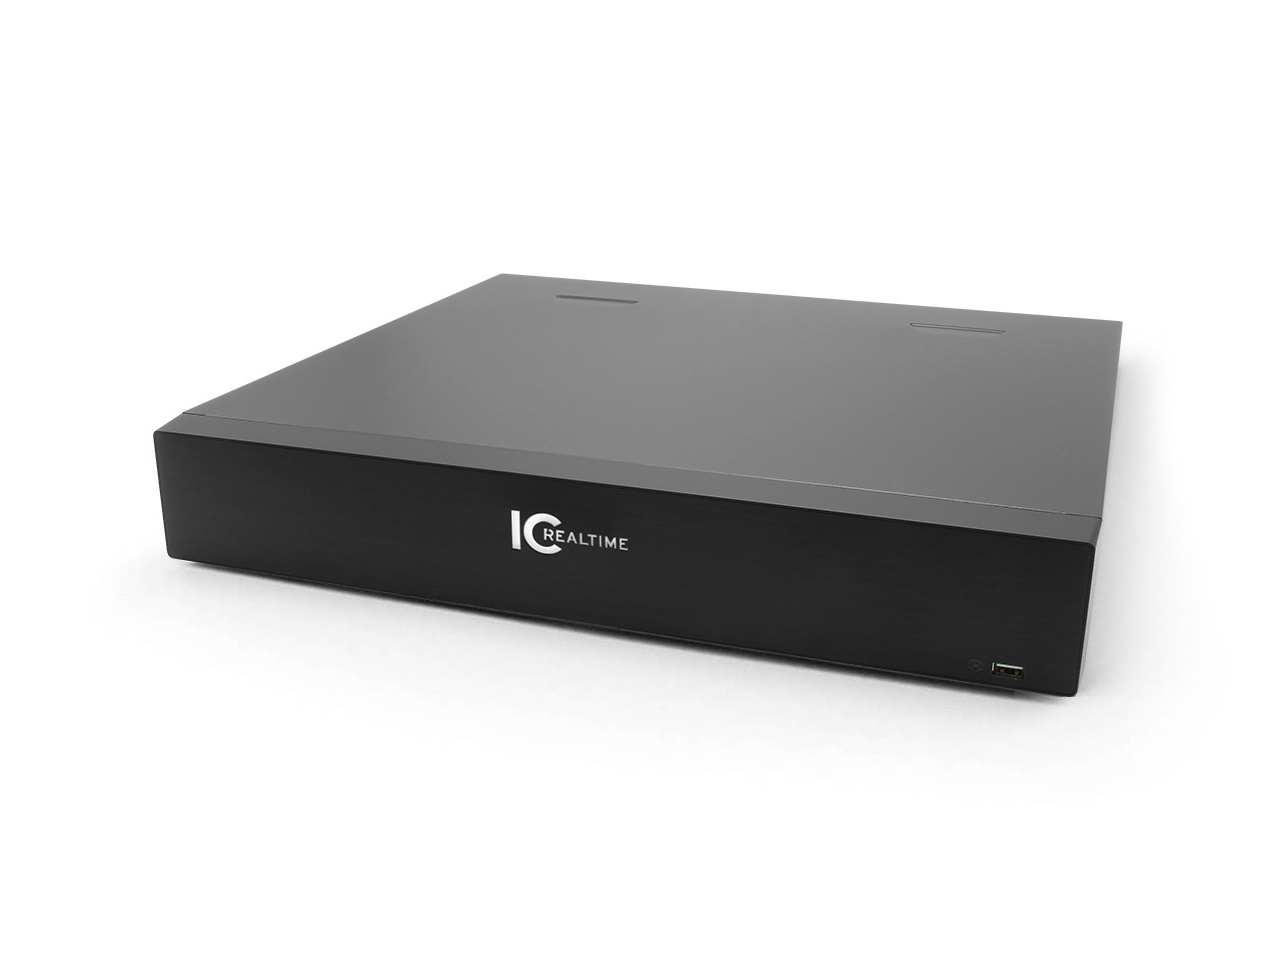 NVR-FX24POE-15U4K1-8TB 24 Channel Rack-Mountable 1.5U NVR/Integrated 24 Port POE Switch/Supports 12MP Resolution/320Mbps Throughput/8TB by ICRealtime